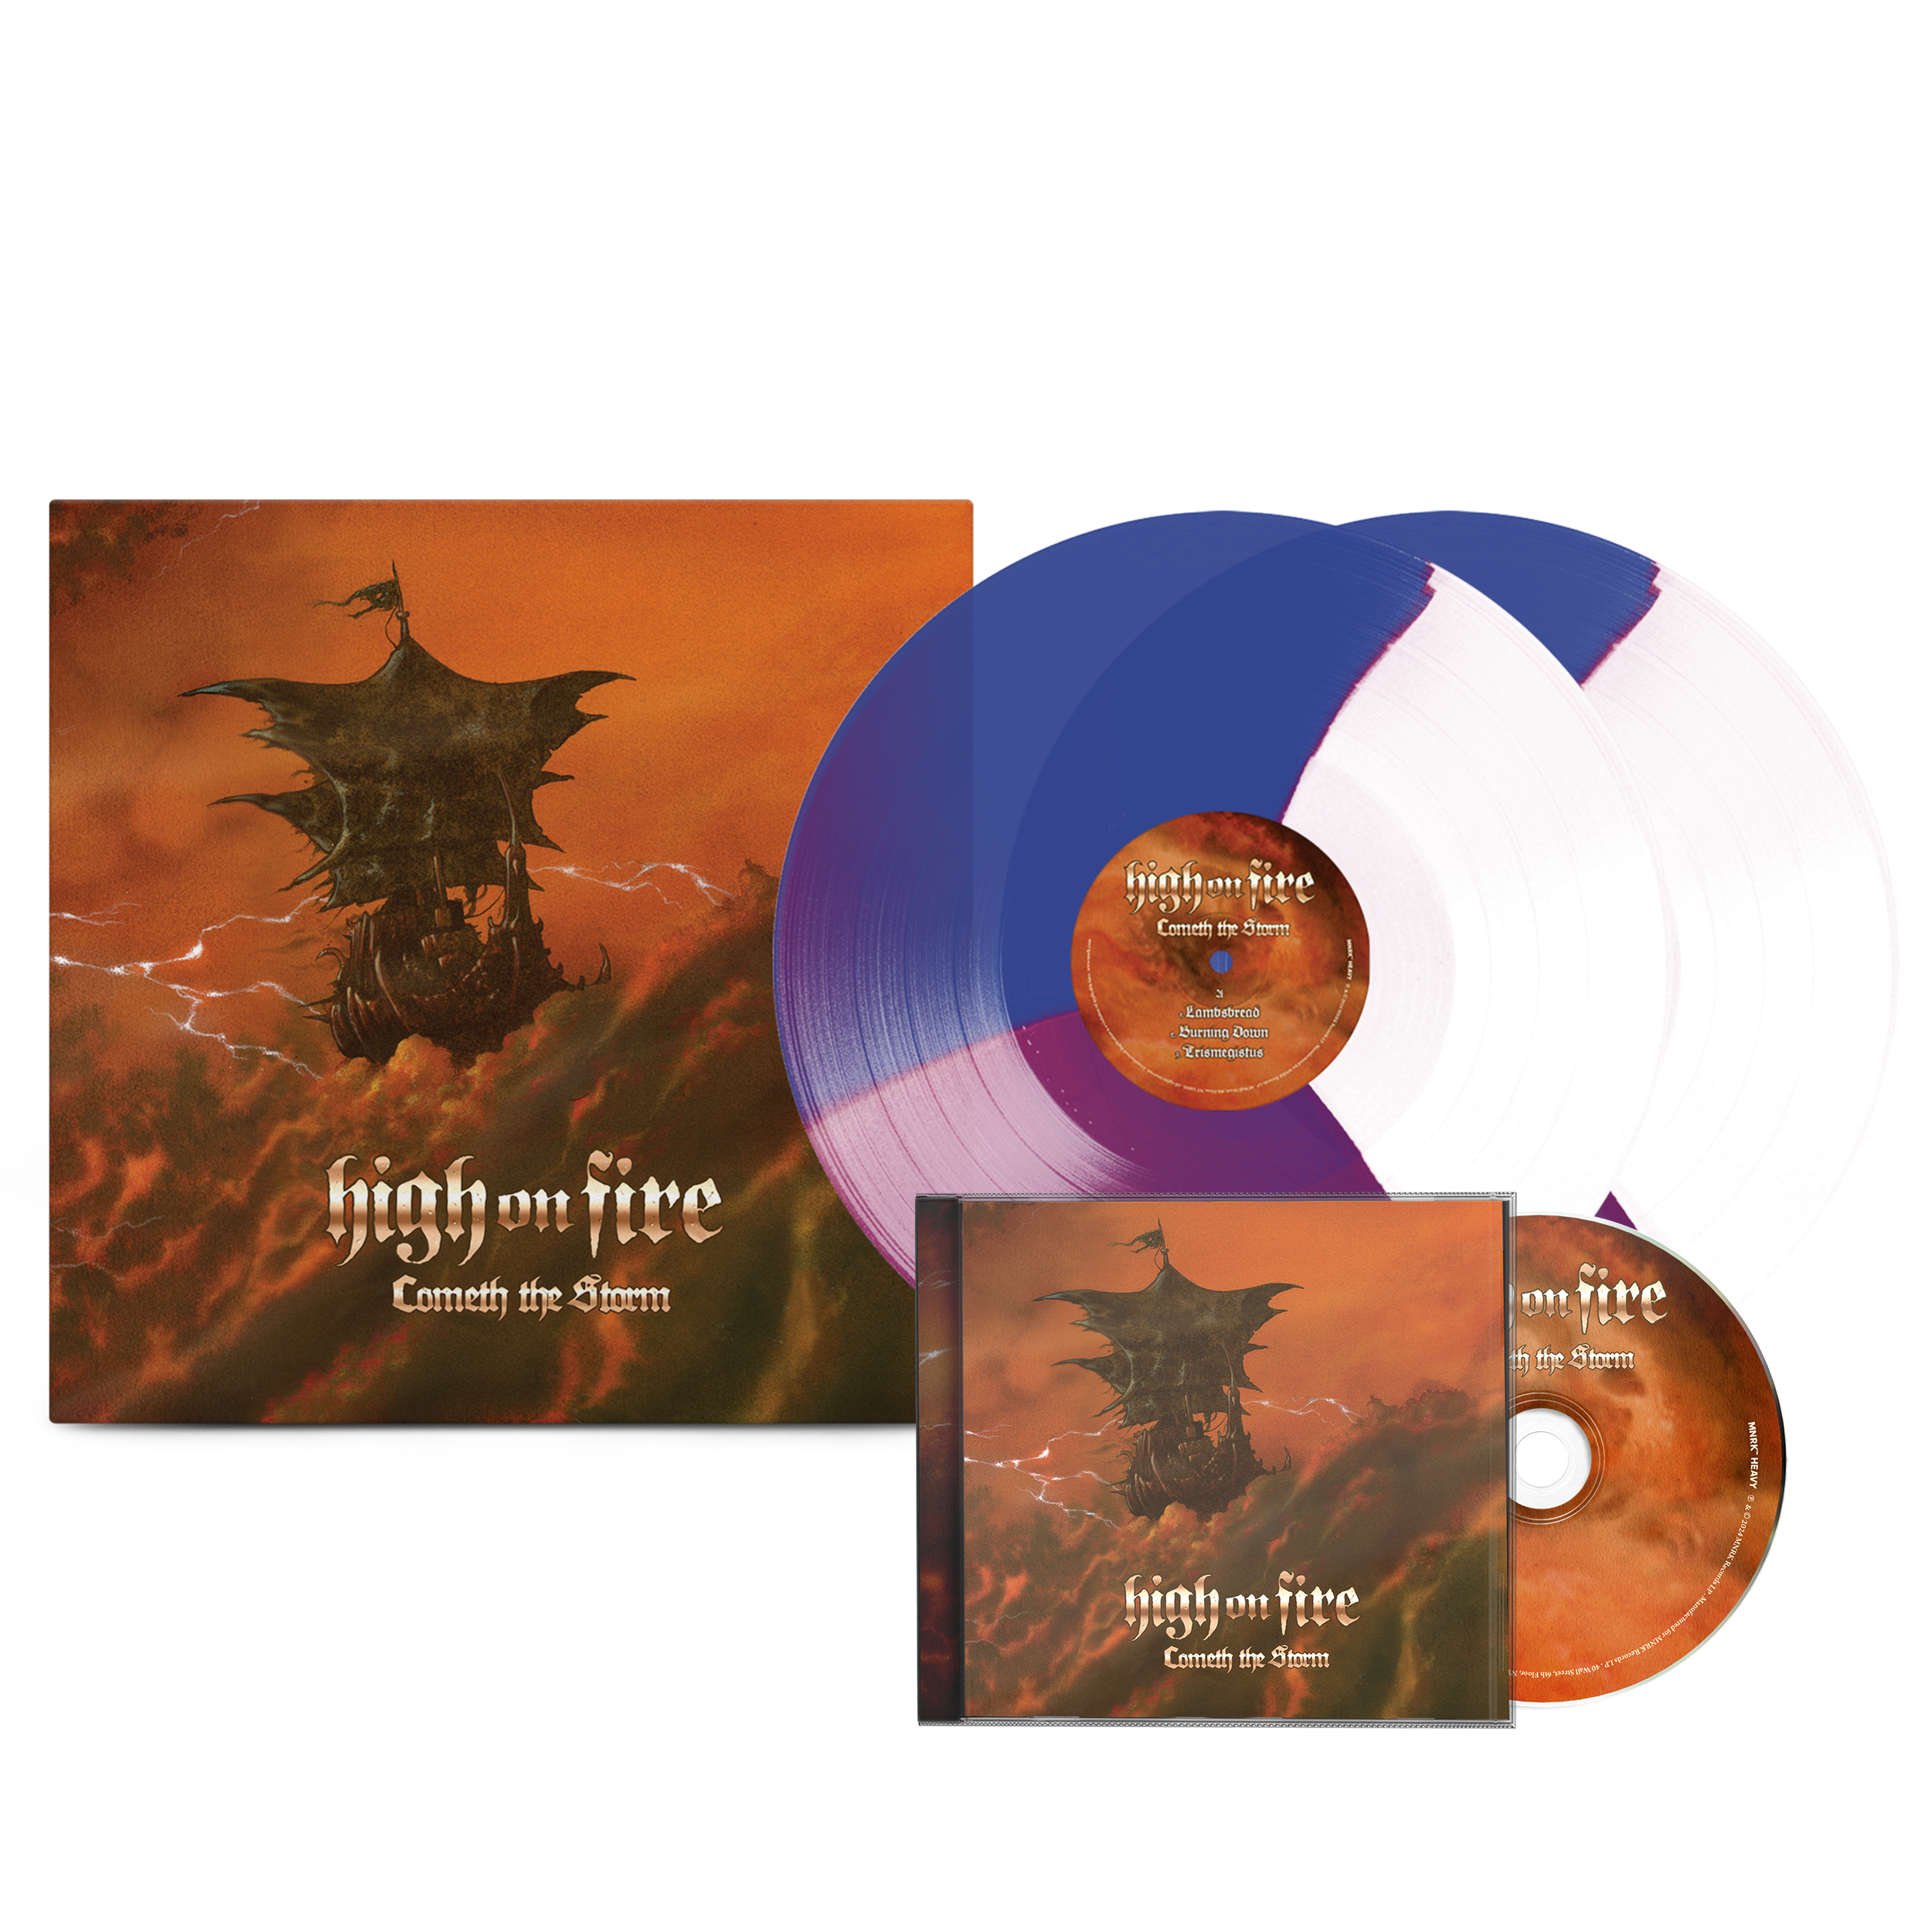 High on Fire - Cometh The Storm Tri-Color Vinyl + High on Fire + Cometh The Storm Compact Disc Bundle